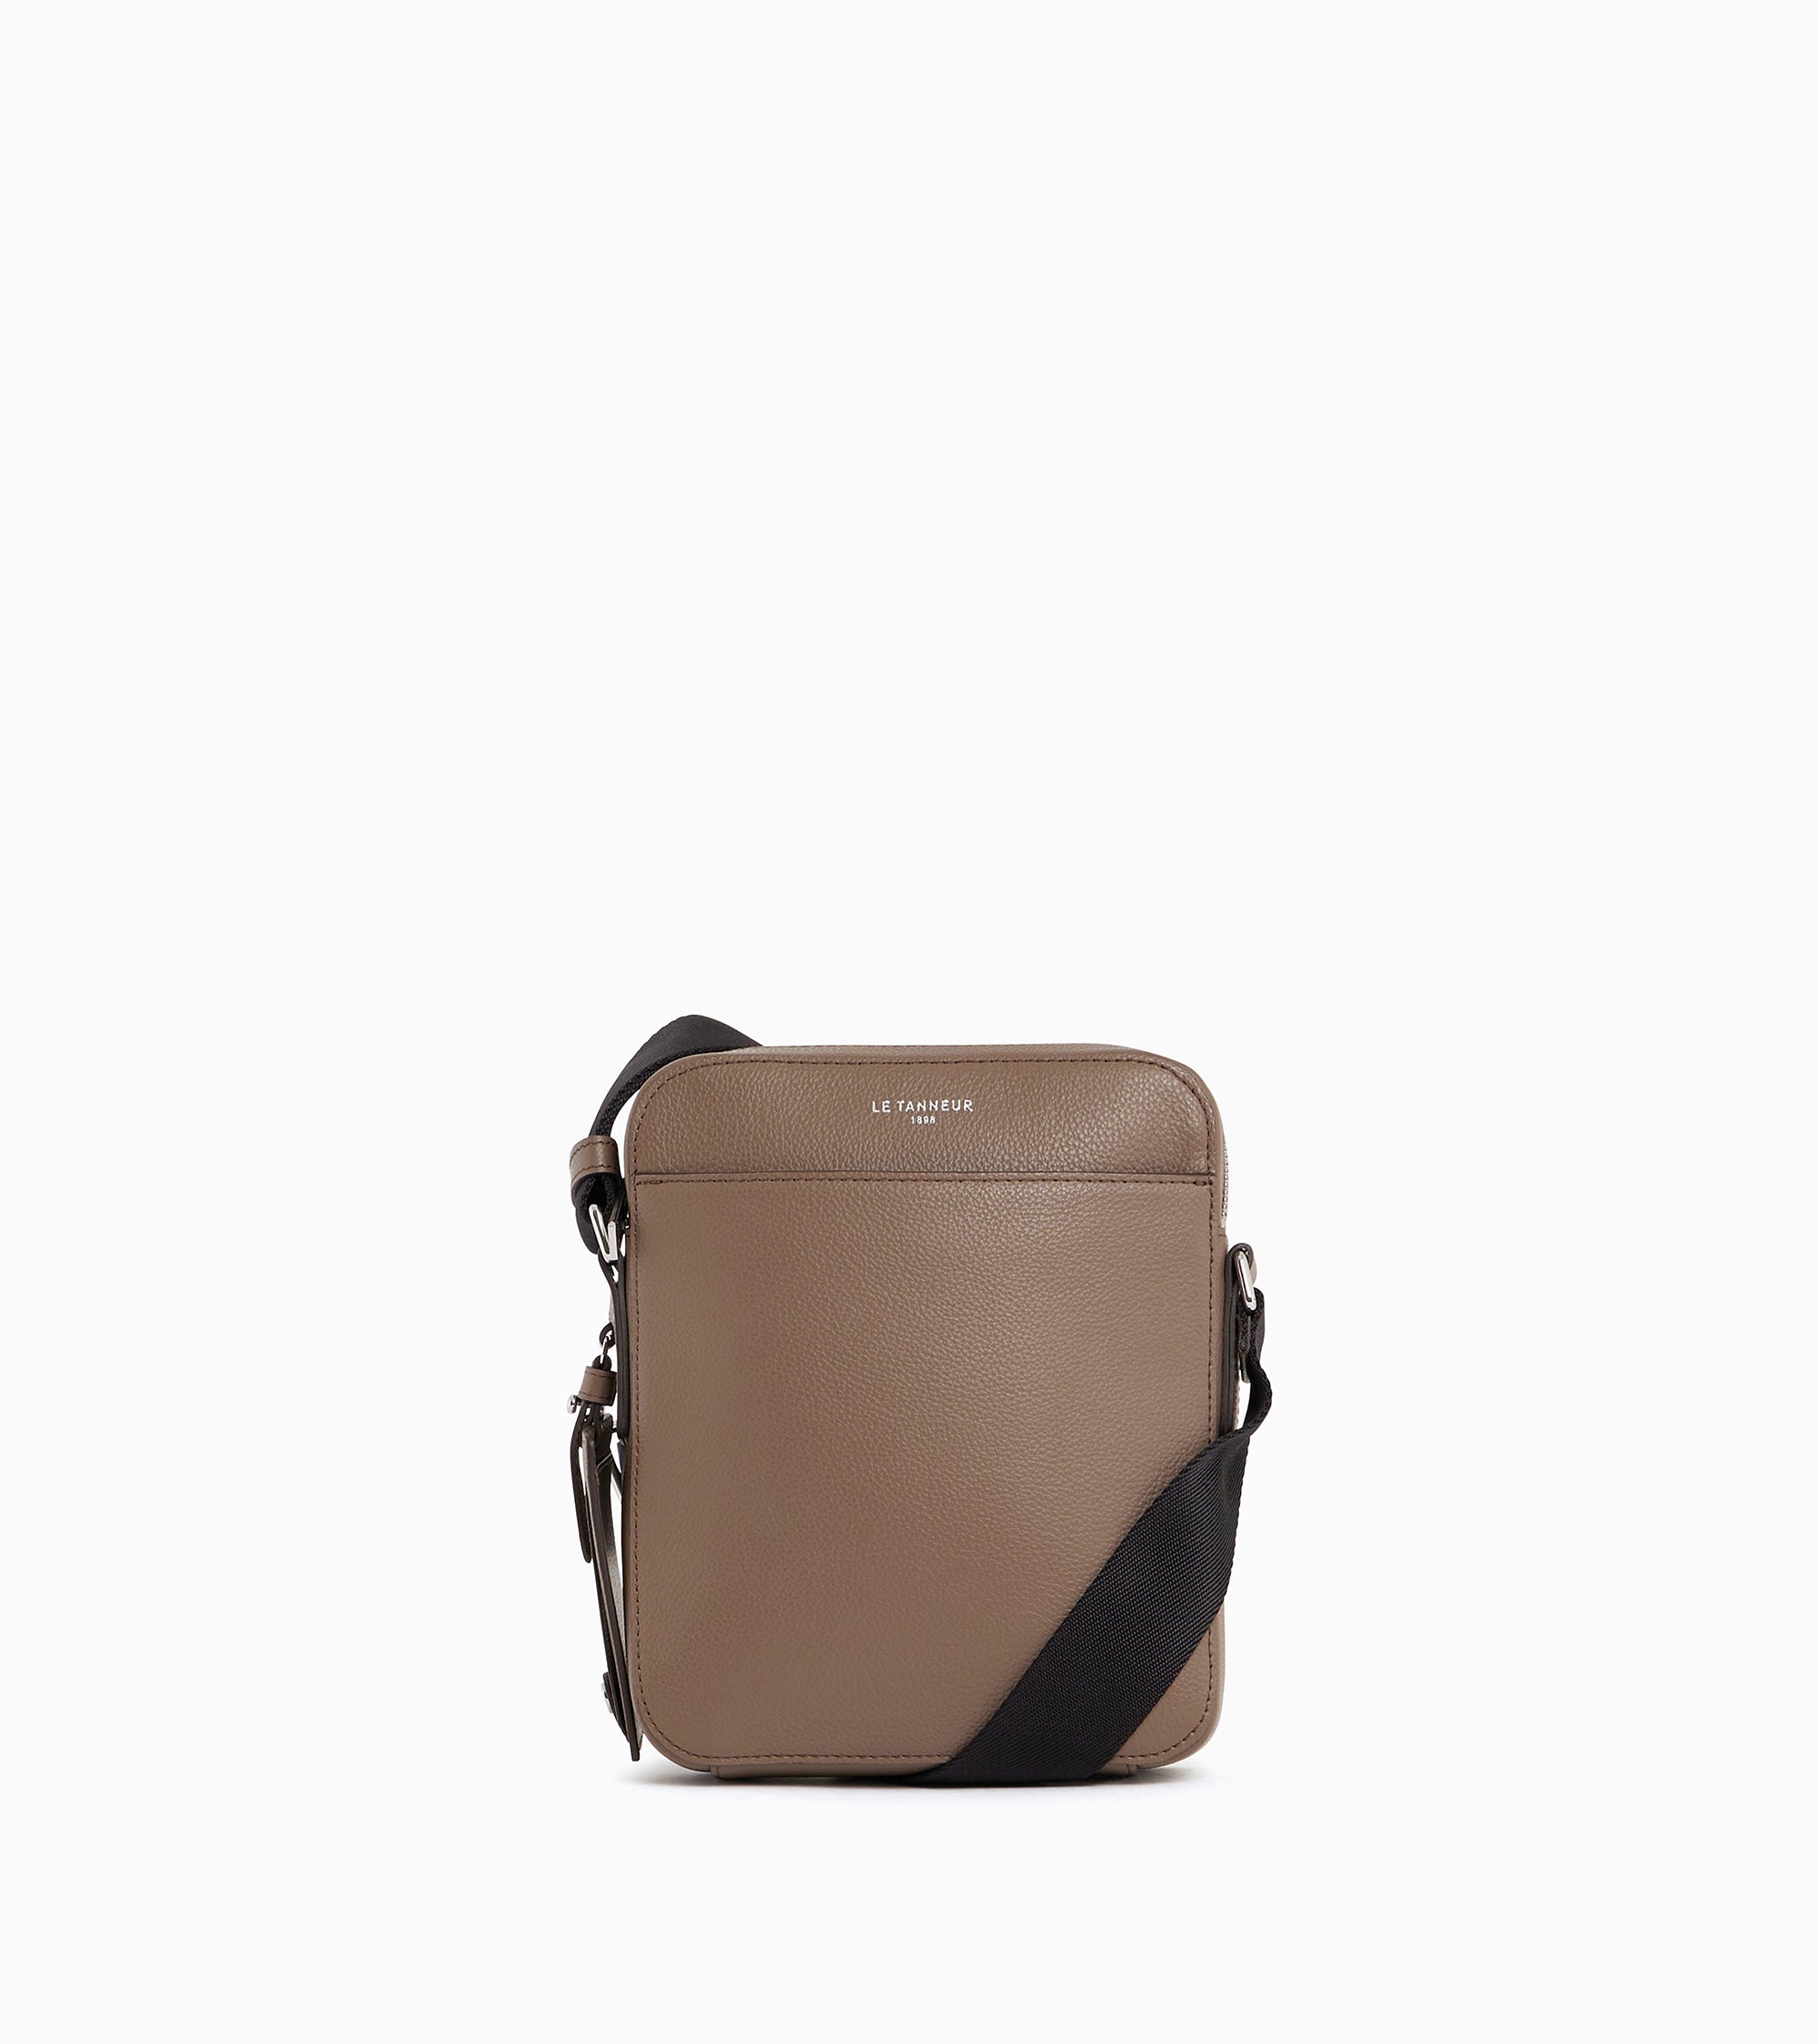 Emile small satchel in pebbled leather